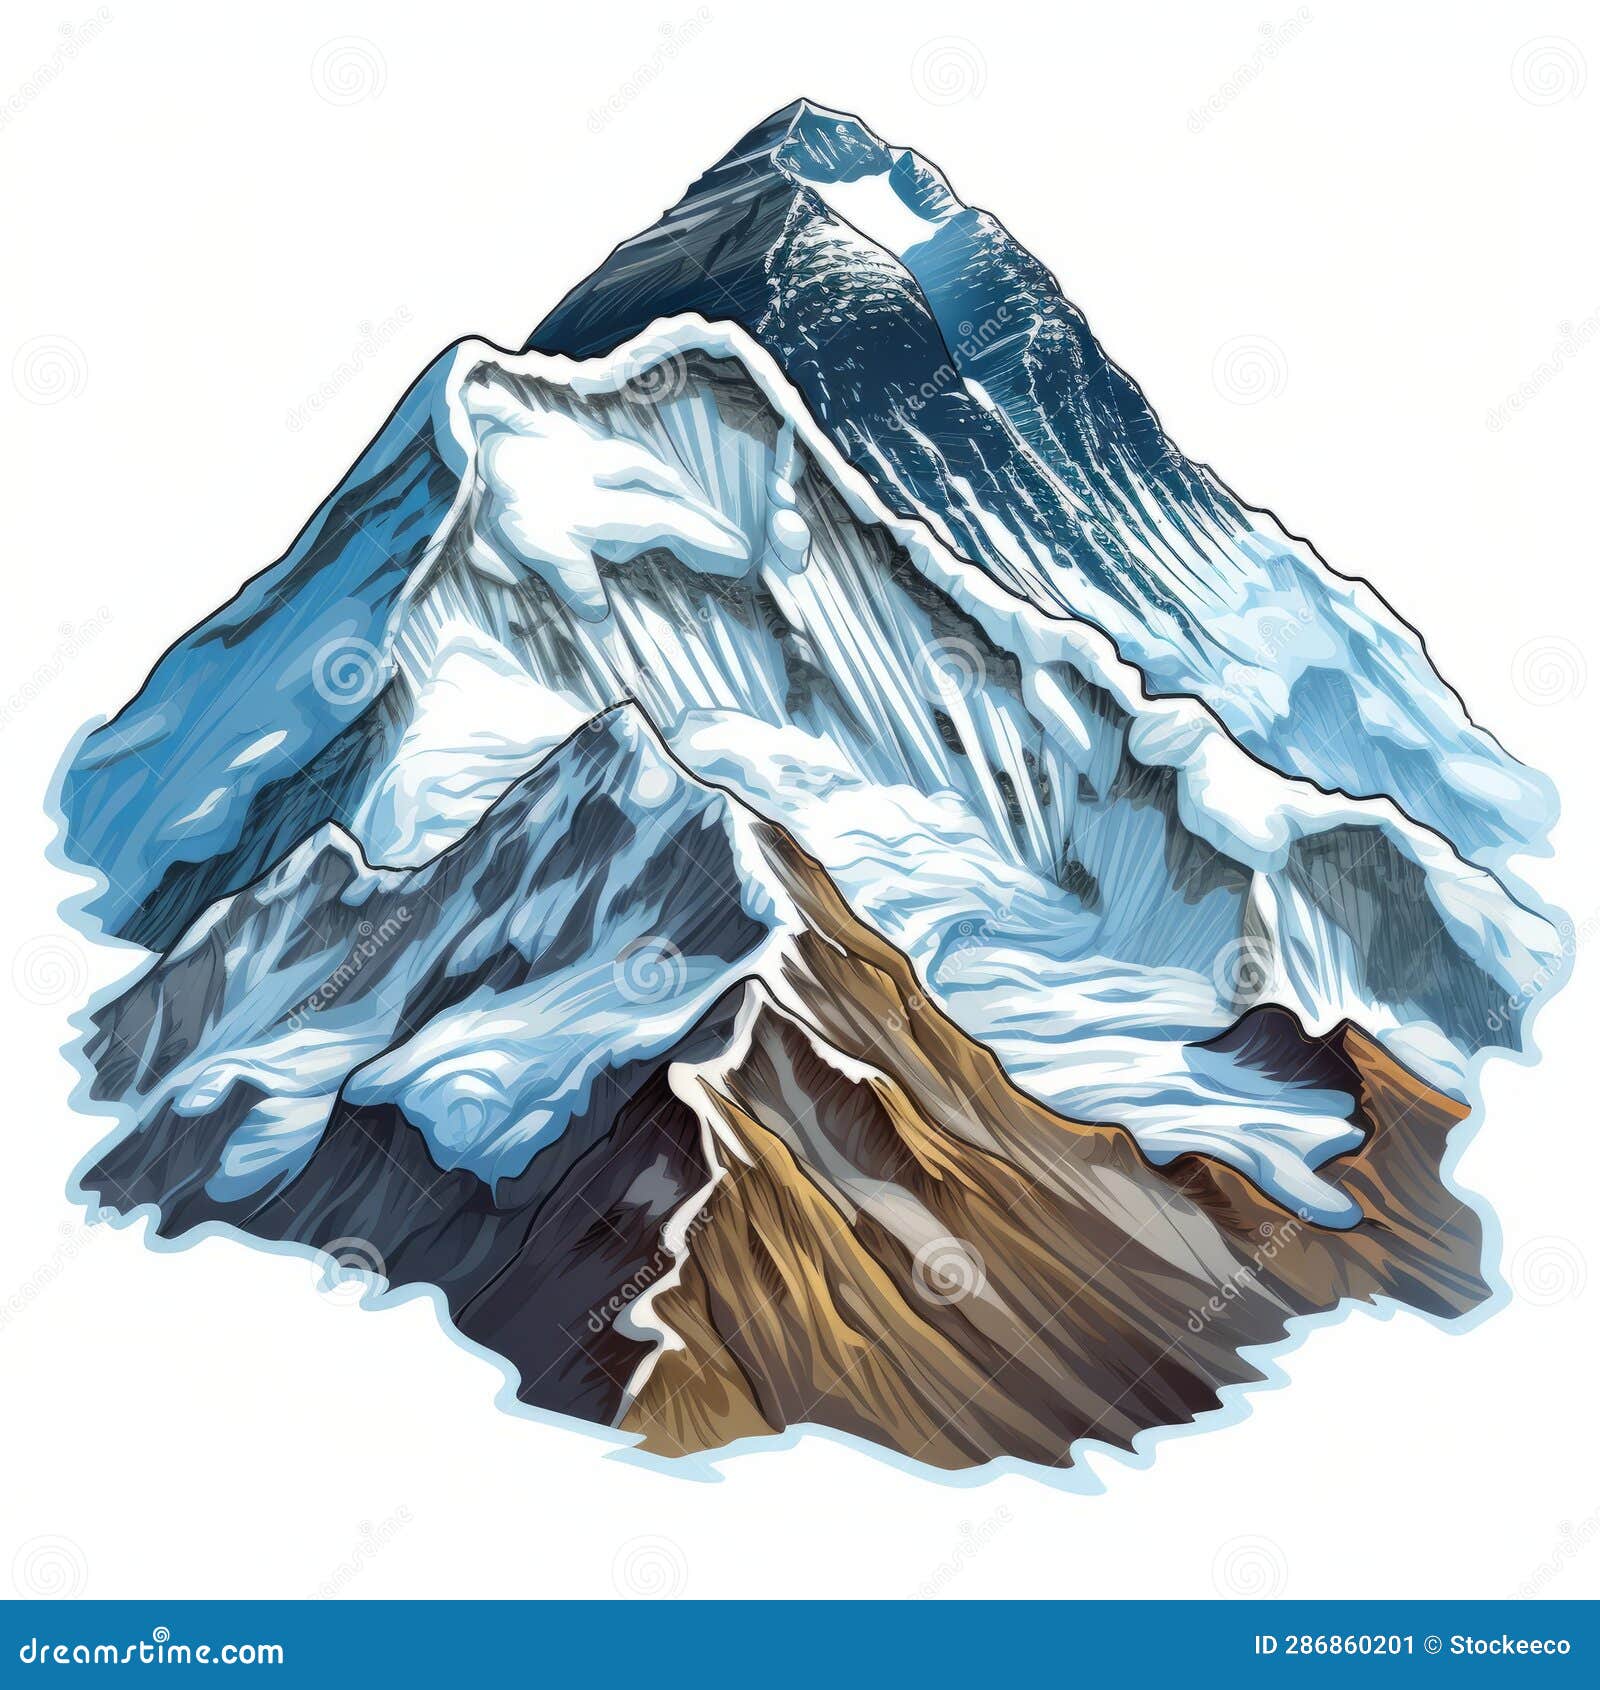 How to Draw Mount Everest Easy - YouTube